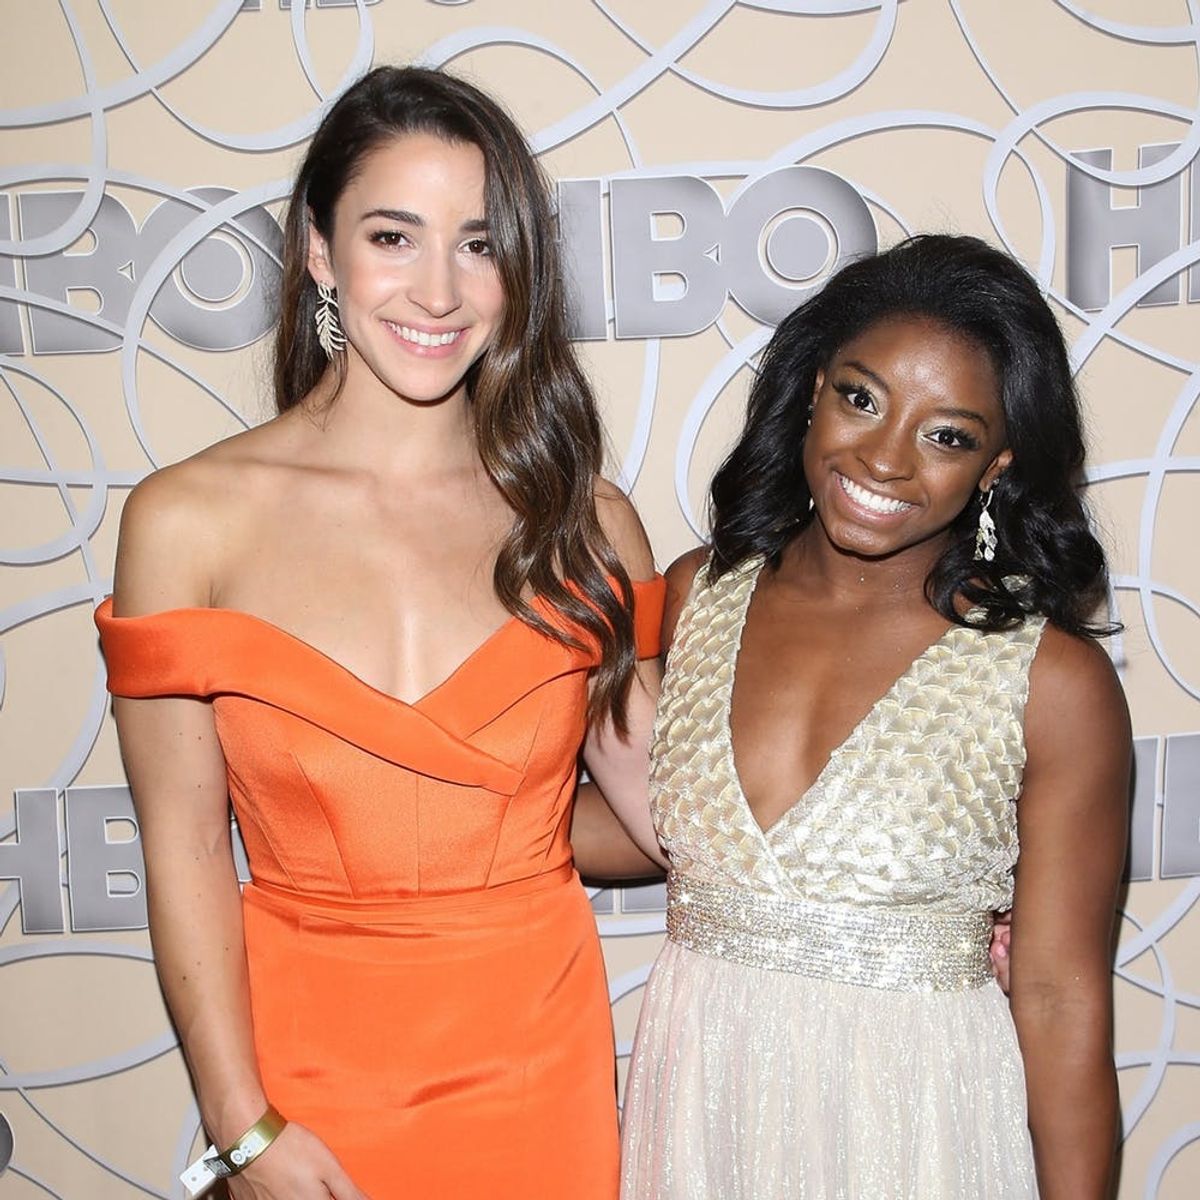 Simone Biles and Aly Raisman’s Sports Illustrated Swimsuit Photos Are All Kinds of Inspiring